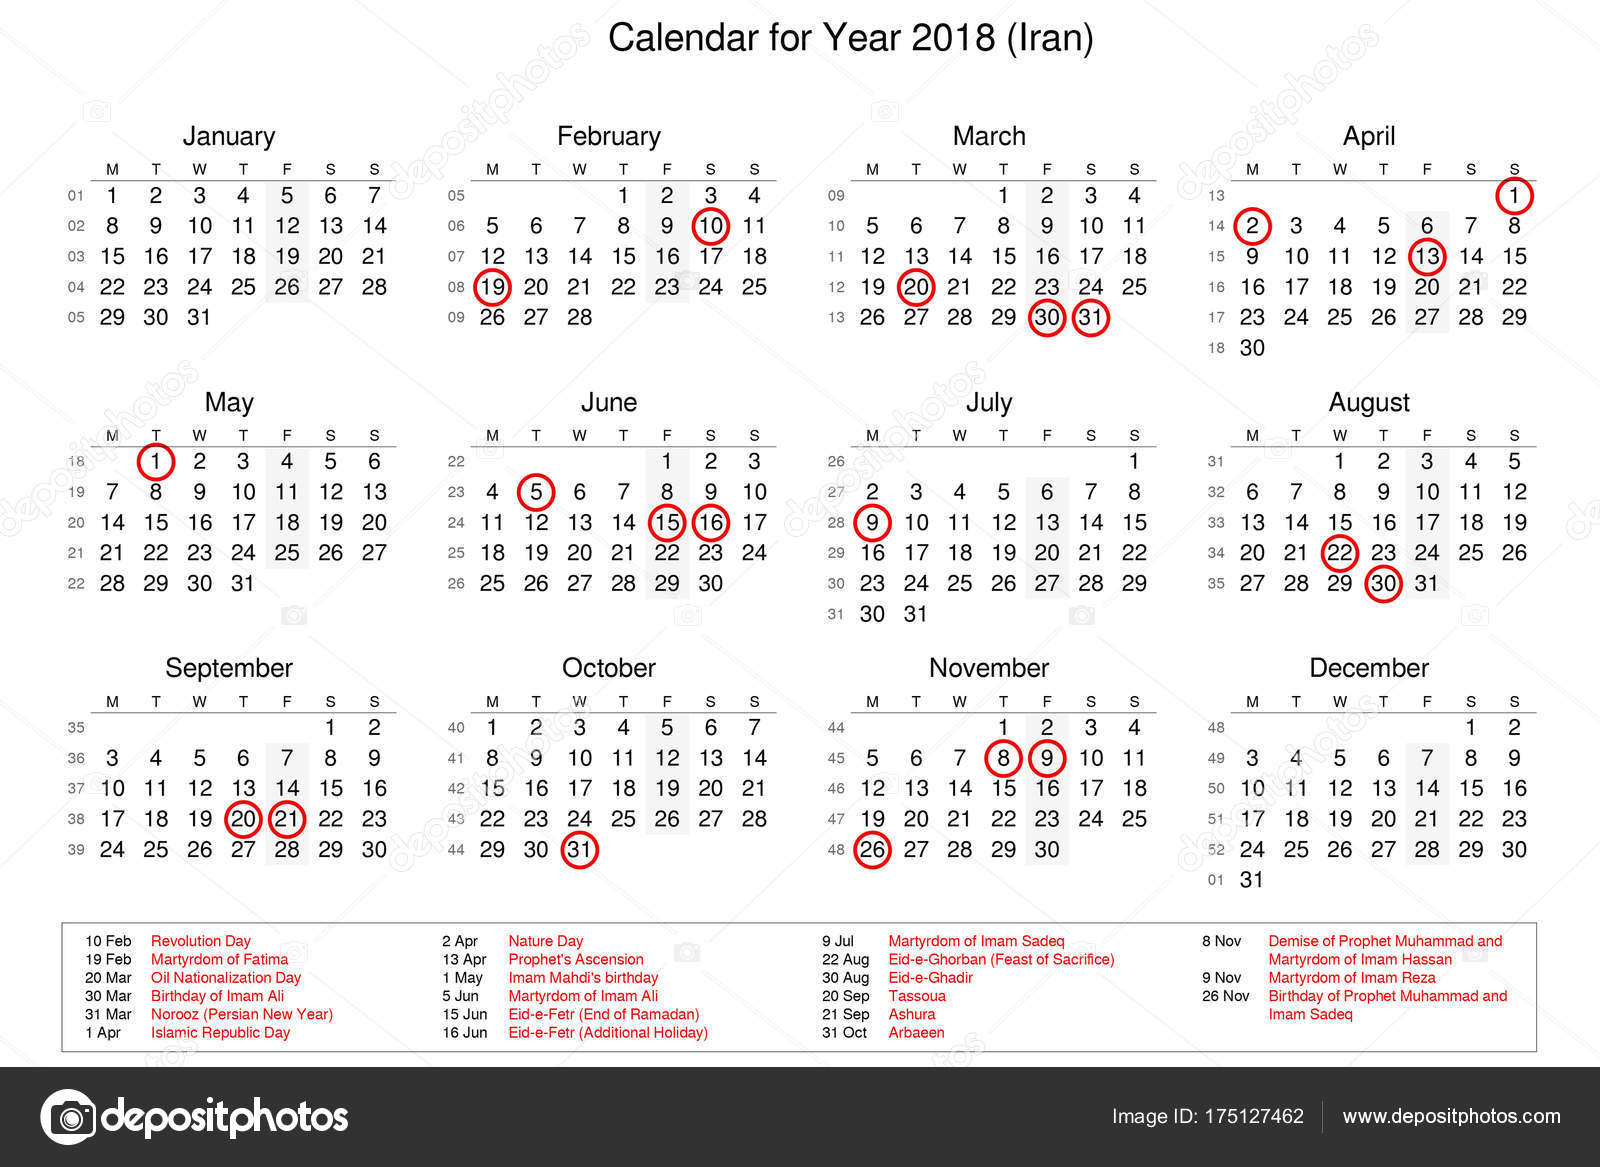 calendar-of-year-2018-with-public-holidays-and-bank-holidays-for